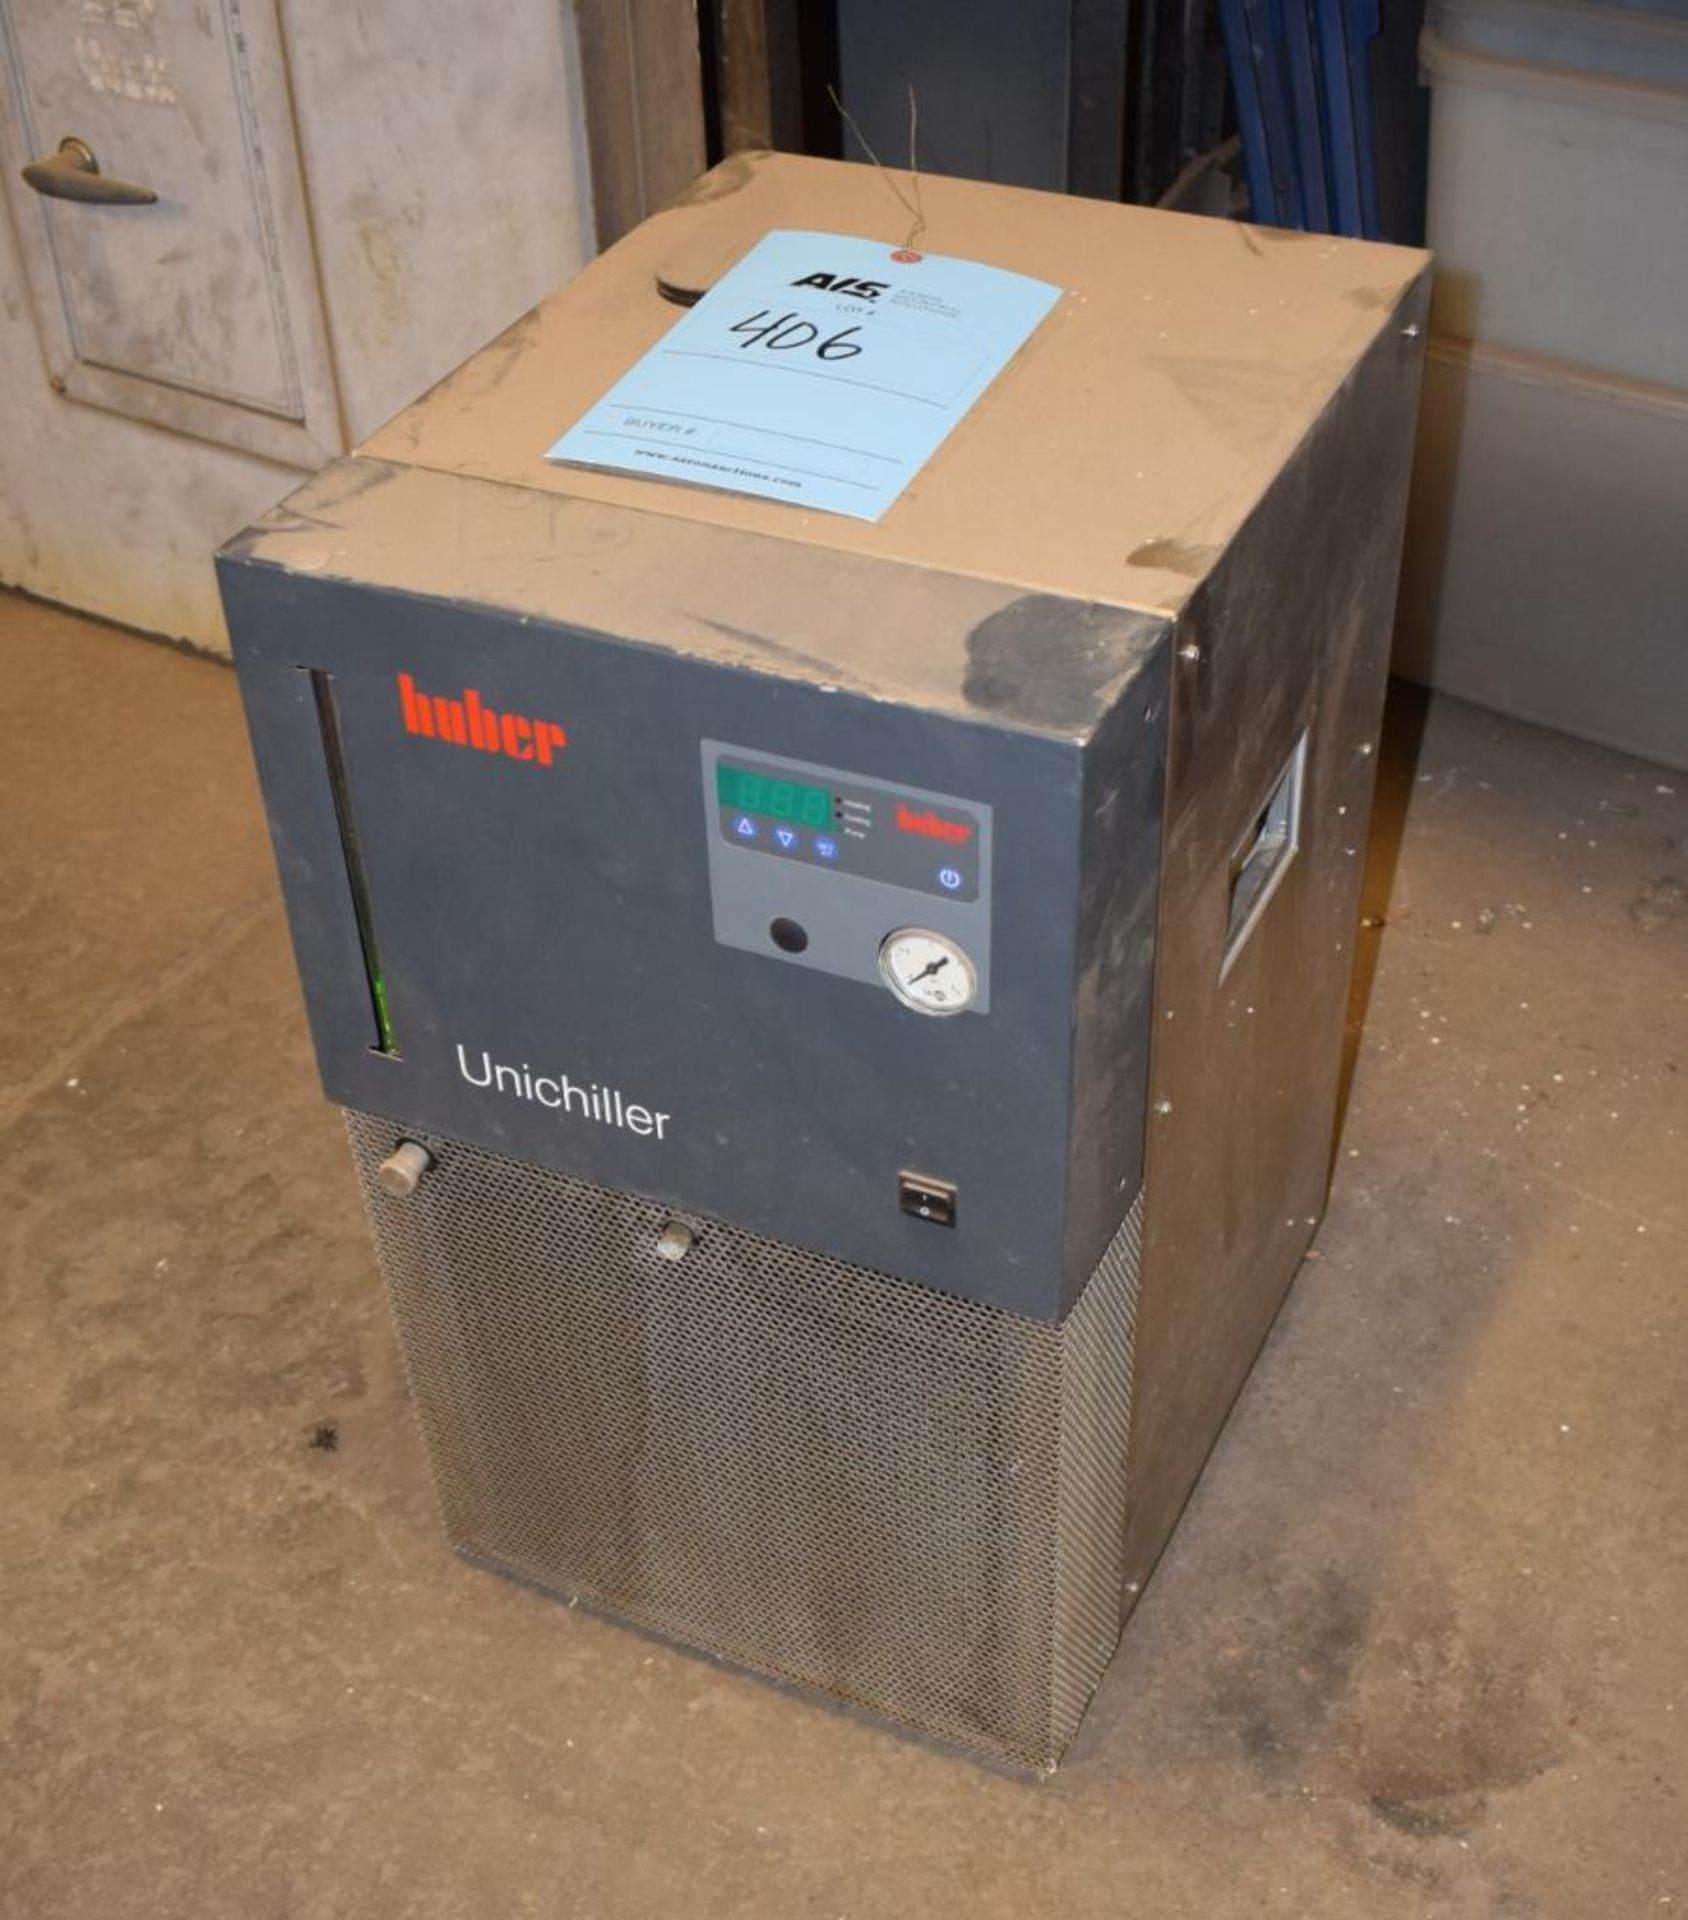 Huber Air Cooled Unichiller, Model 010T. Approximate operating temperature range -20 to +40 degrees